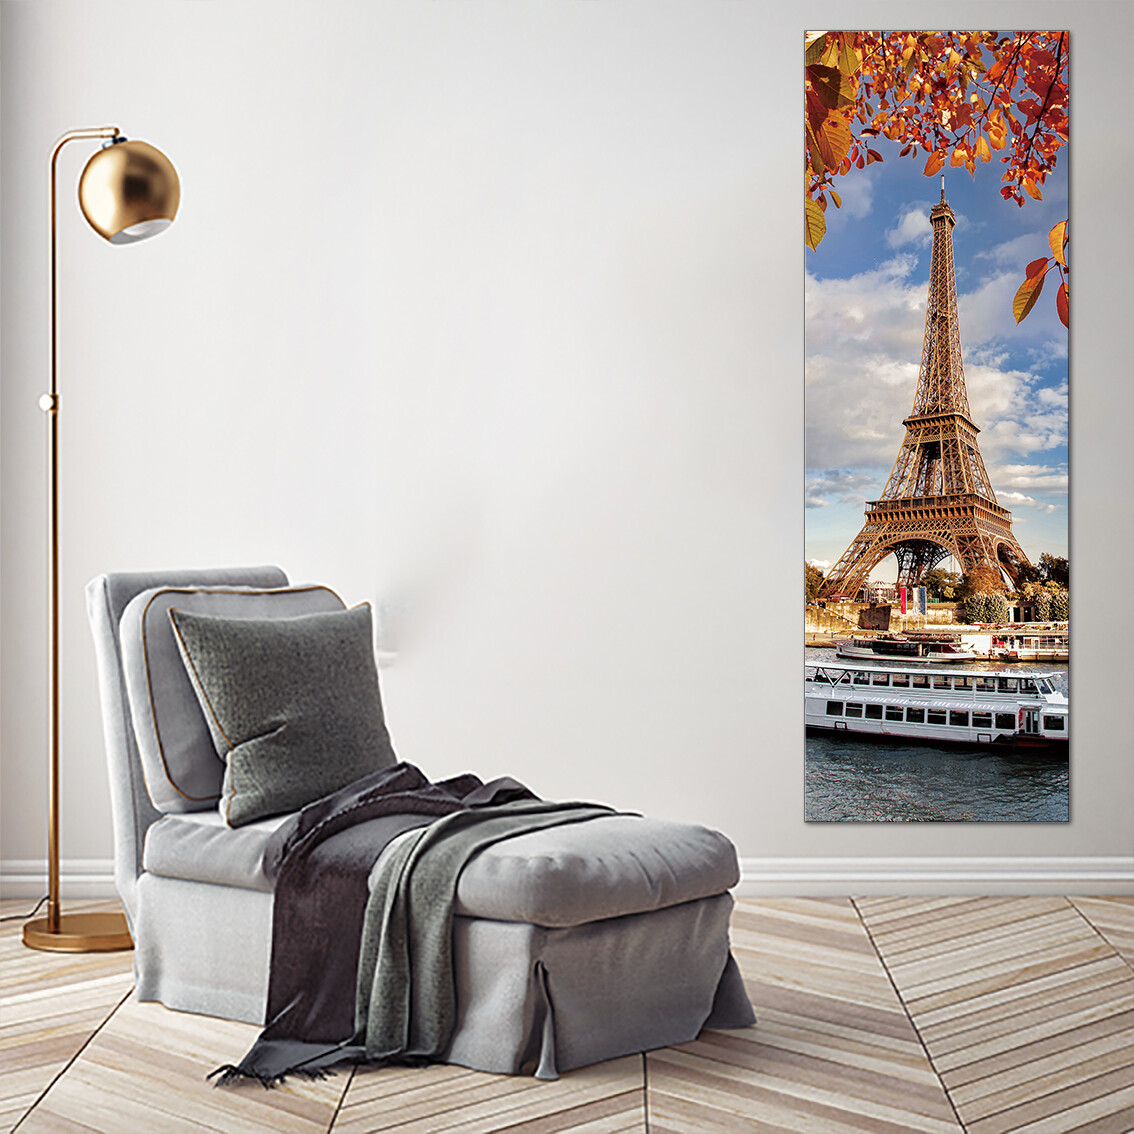 Eiffel Tower Paris - Modern Luxury Wall art Printed on Acrylic Glass - Frameless and Ready to Hang